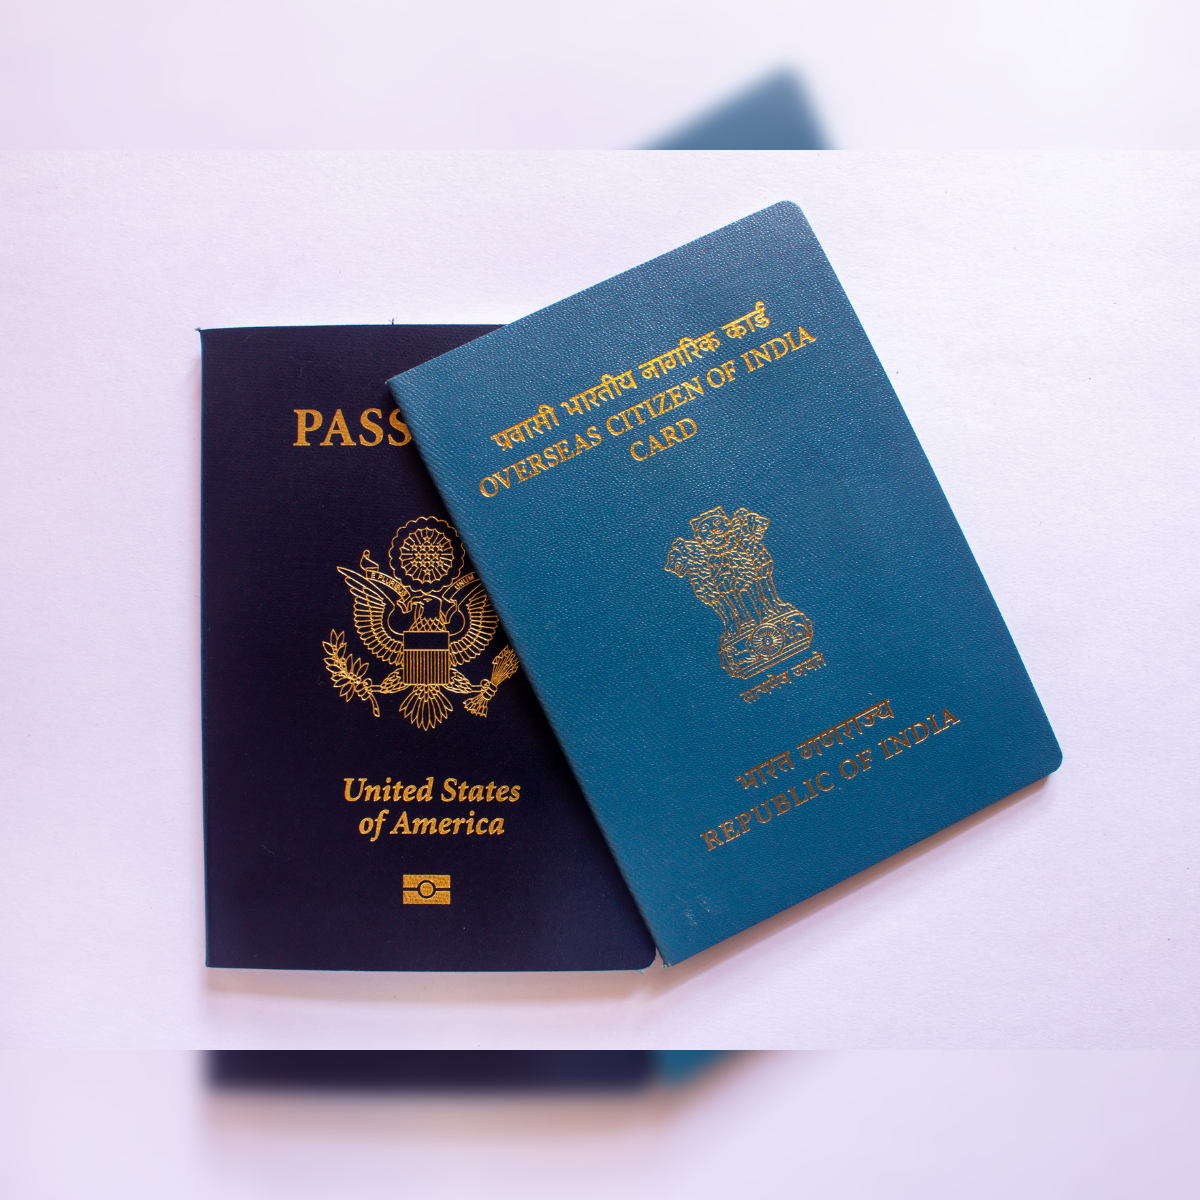 dual citizenship: Can Indians have dual citizenship? Here's the fine print  - The Economic Times